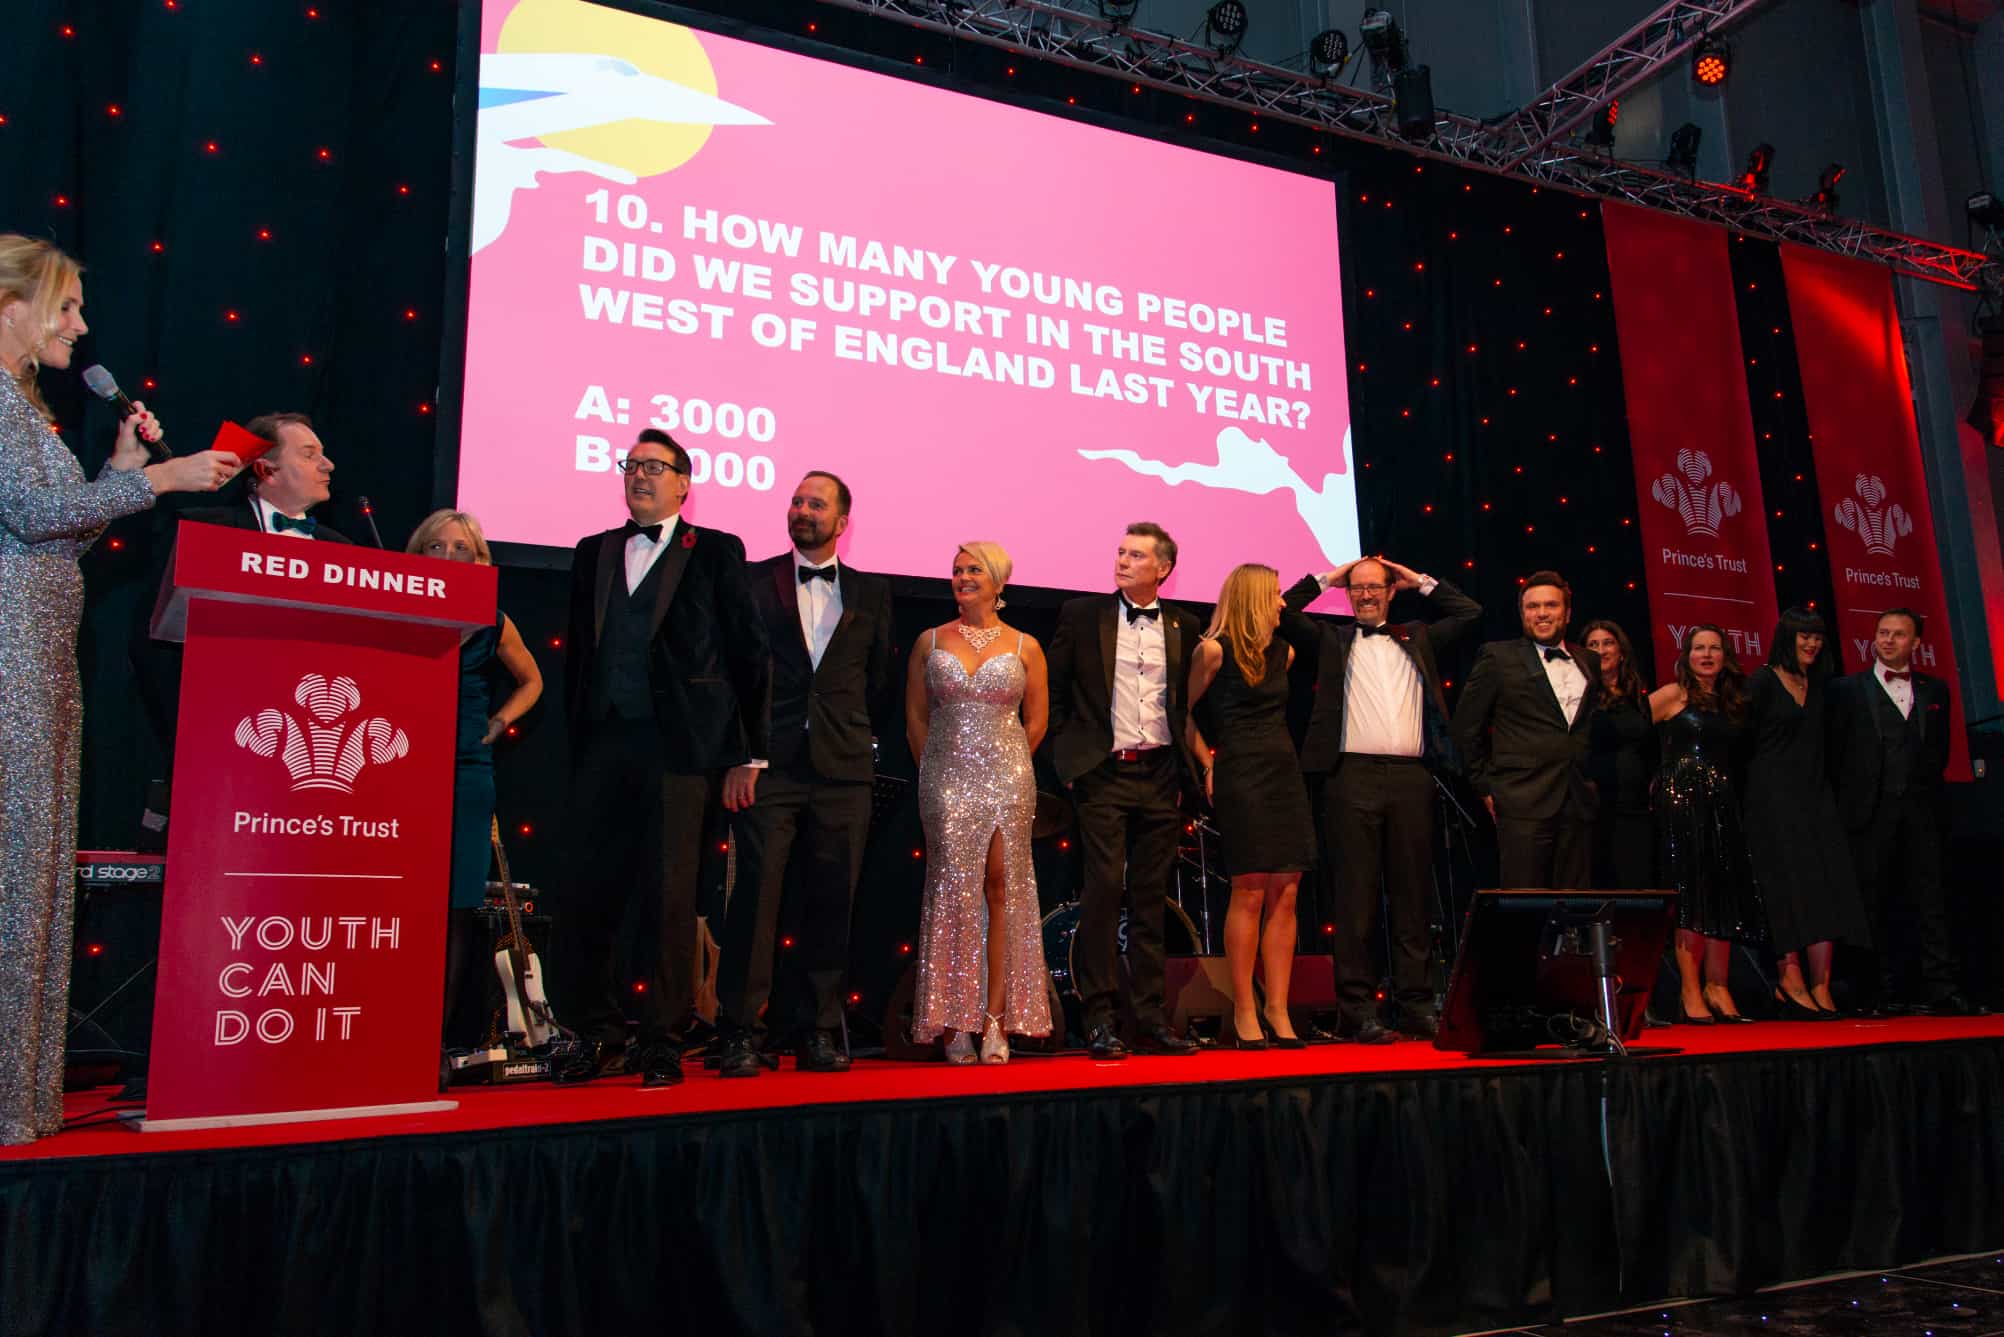 Prince’s Trust Red Dinner – Charity Fundraiser